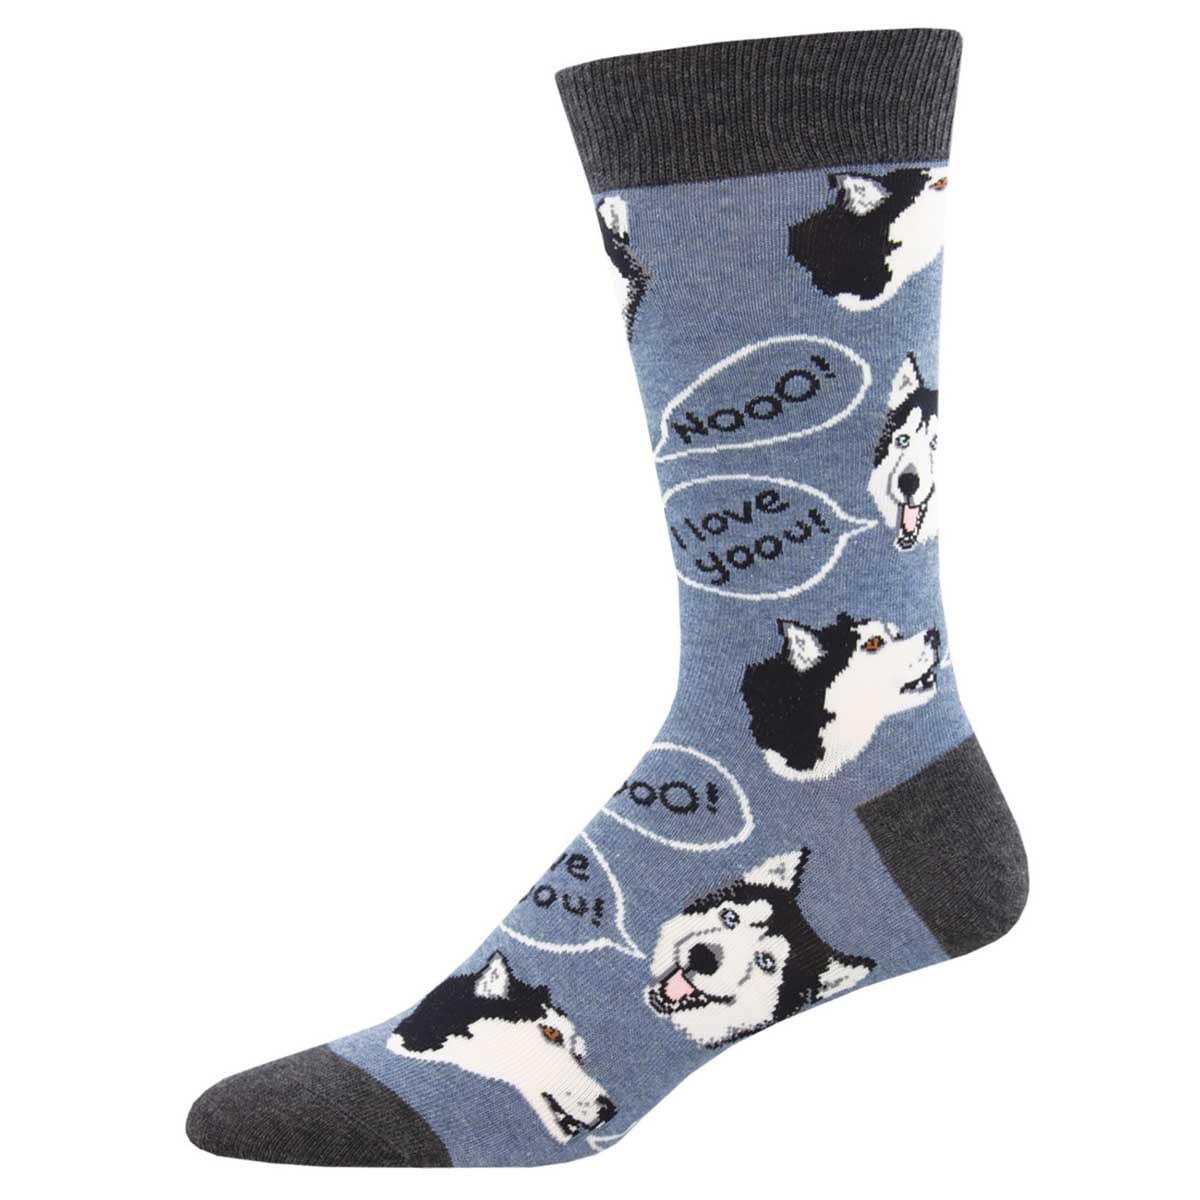 Howling For You Men's Crew Sock Blue